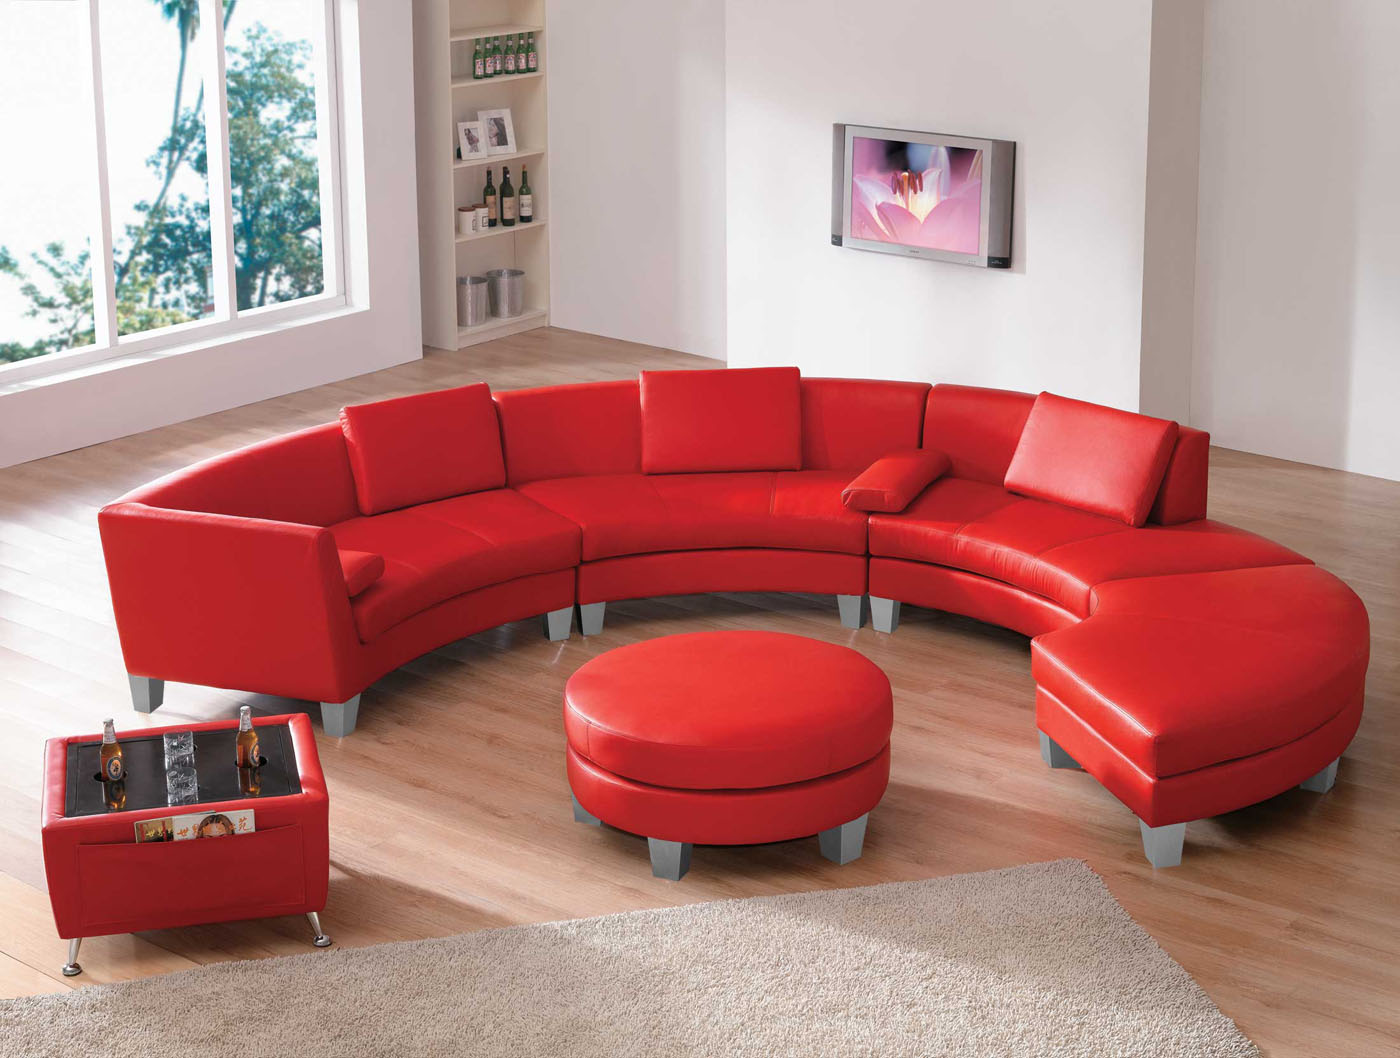 Contemporary-Living-Room-Sets-with-U-Shaped-Red-Sofa-Living-Room-near-Round-Shaped-Red-Leather-Coffee-Table-Ottoman-plus-Wooden-Flooring-also-White-Wall-Paint-and-Glass-Windows-Set